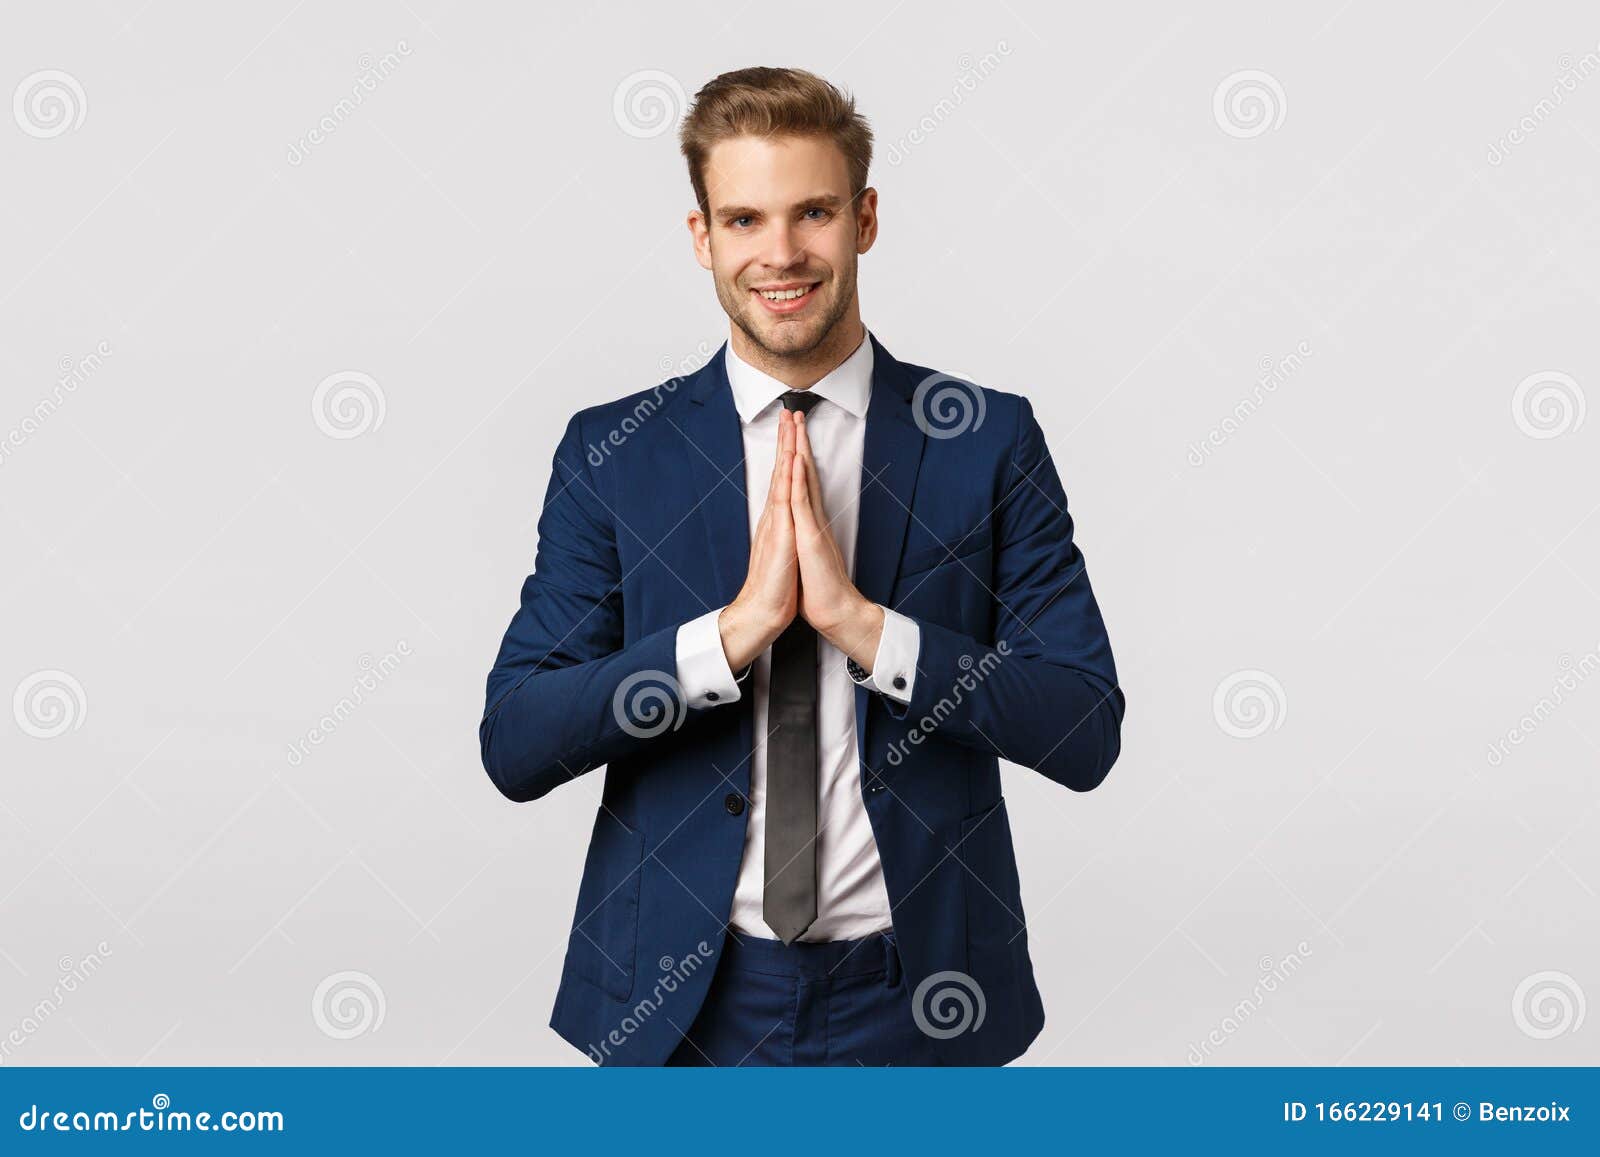 Namaste. Handsome Young Caucasian Businessman Greeting Asian Business ...